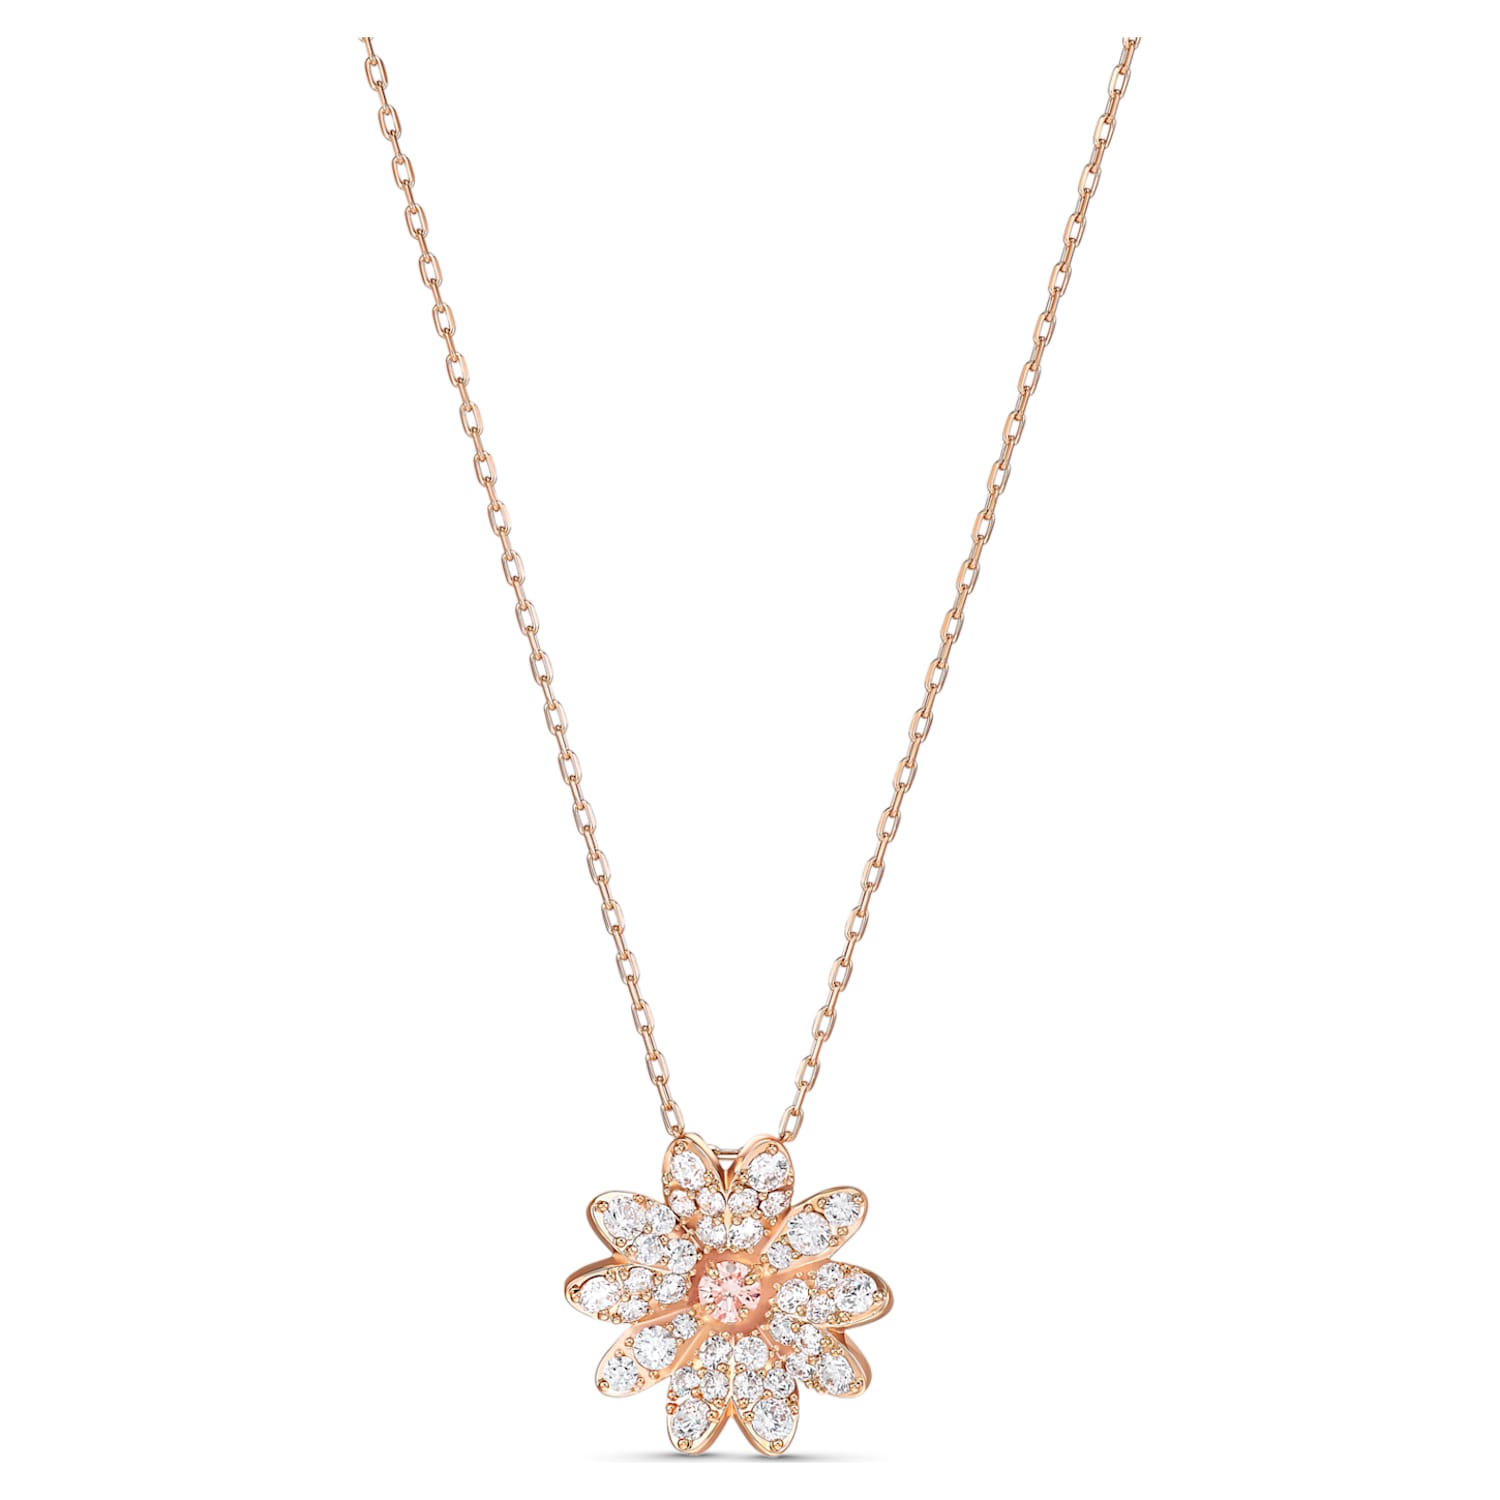 Details about   Two Tone Rose Gold Orthodox St Nectarios Diamonds Engravable 1" Pendant Necklace